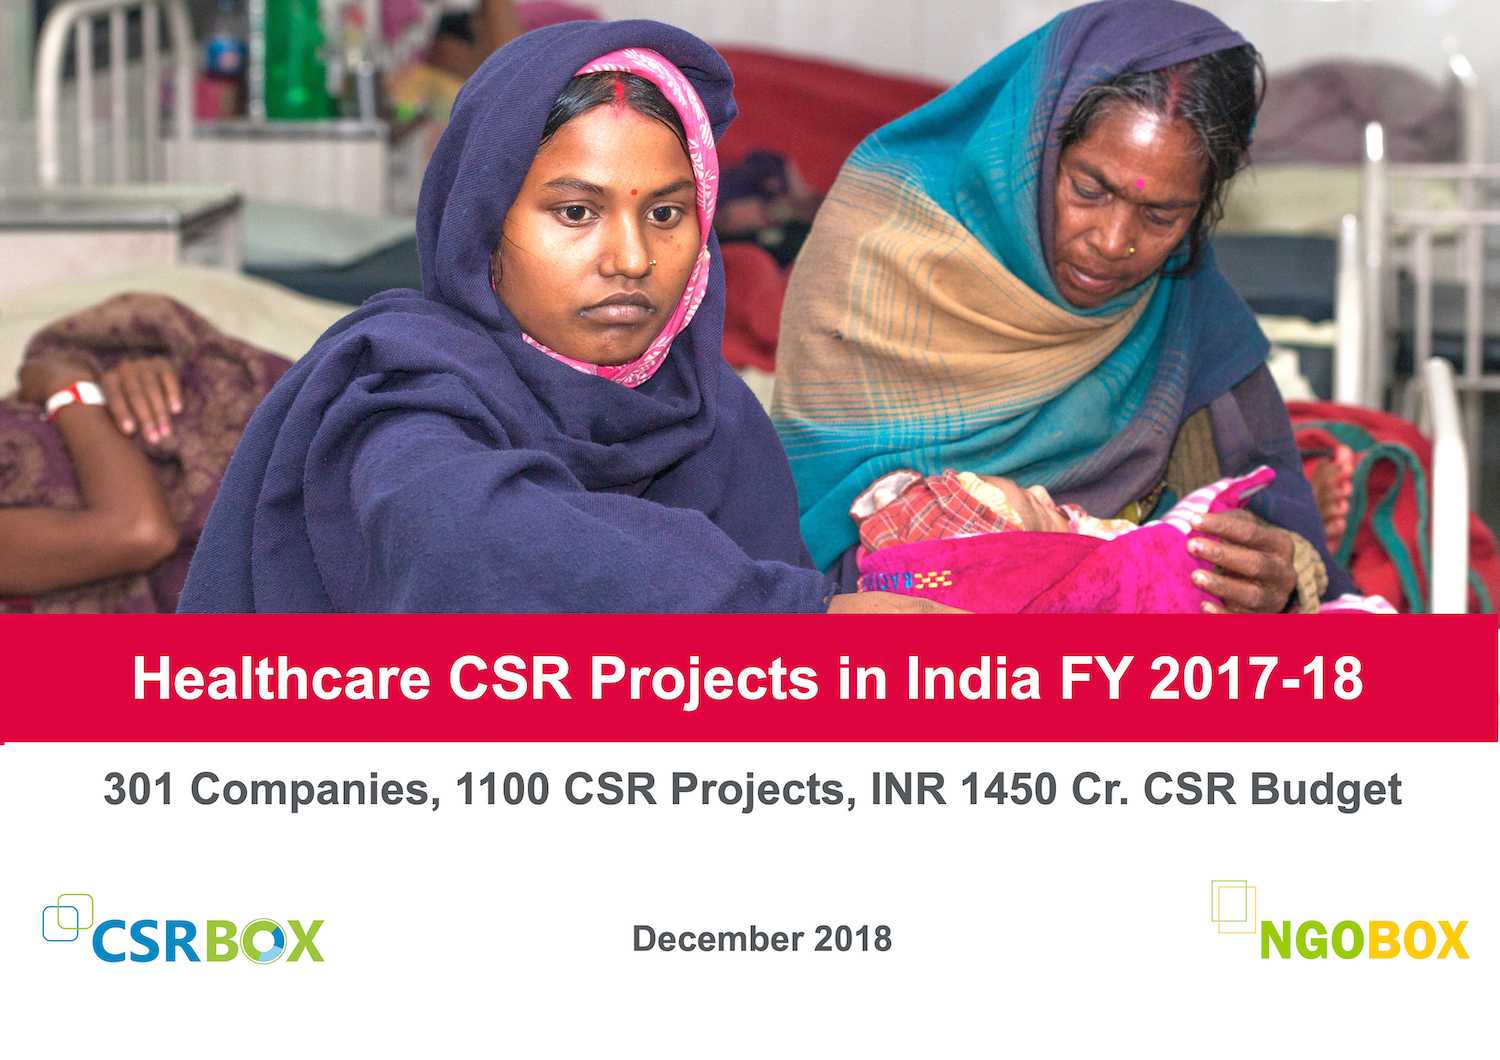 CSR Projects in Healthcare in India in FY2017-18